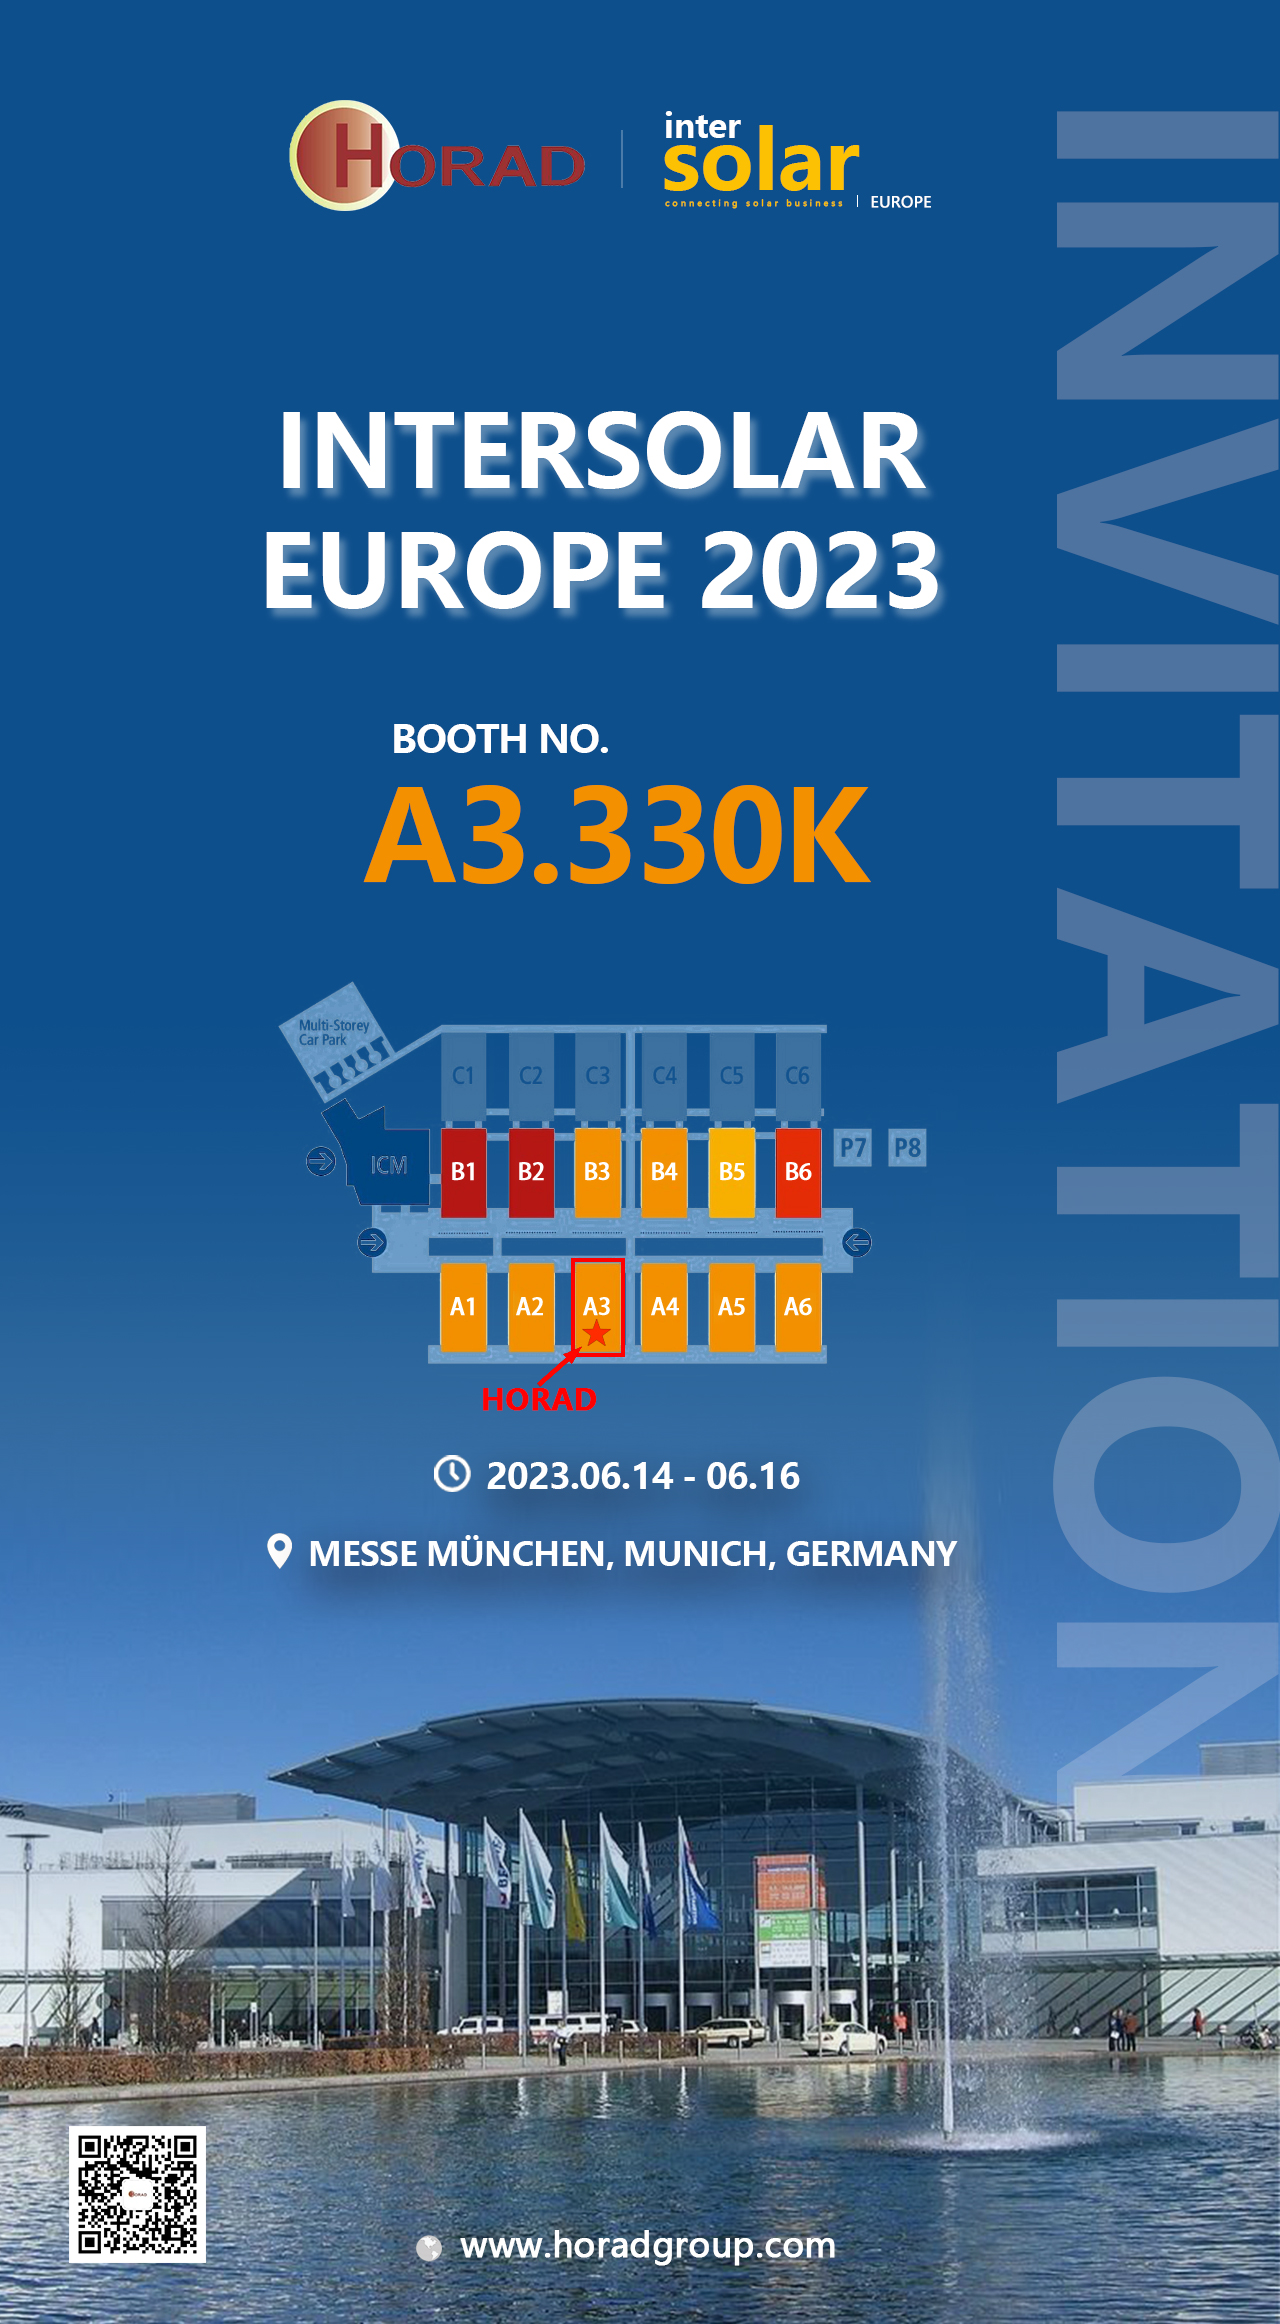 Exhibition Upcoming | HORAD Meets with You in Intersolar Europe